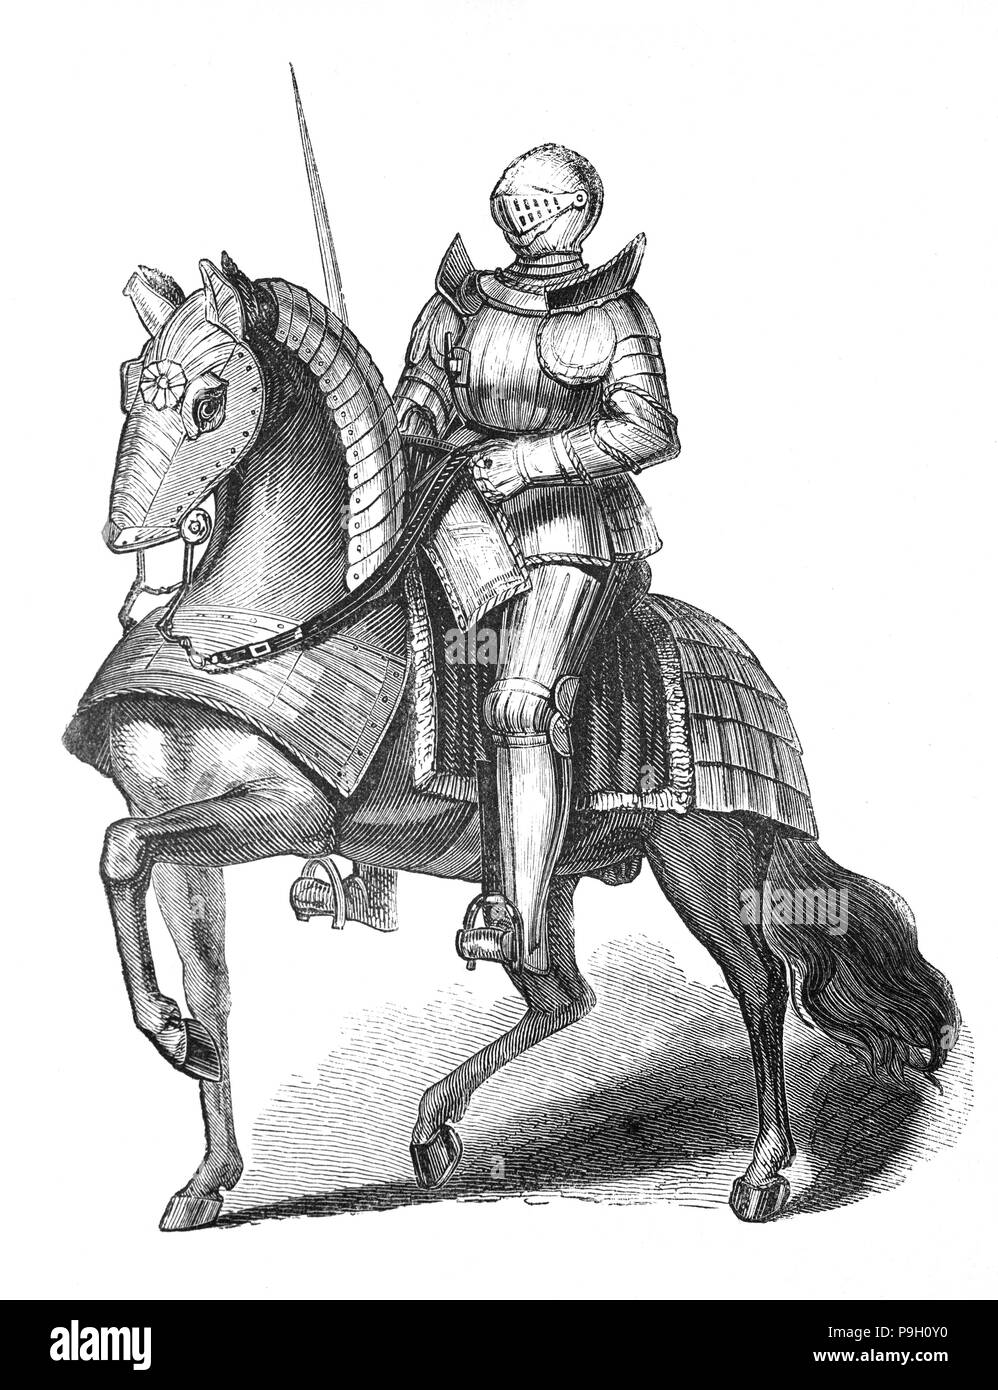 Henry VII (1457 – 1509),  first monarch of the House of Tudor on horesback wearing full body armour.  He became King of England and Lord of Ireland following his seizure of the crown on 22 August 1485, when his forces defeated King Richard III at the Battle of Bosworth Field, the culmination of the Wars of the Roses. He was the last king of England to win his throne on the field of battle. He cemented his claim by marrying Elizabeth of York, daughter of Edward IV and niece of Richard III. Henry was successful in restoring the power and stability of the English monarchy after the civil war. Stock Photo